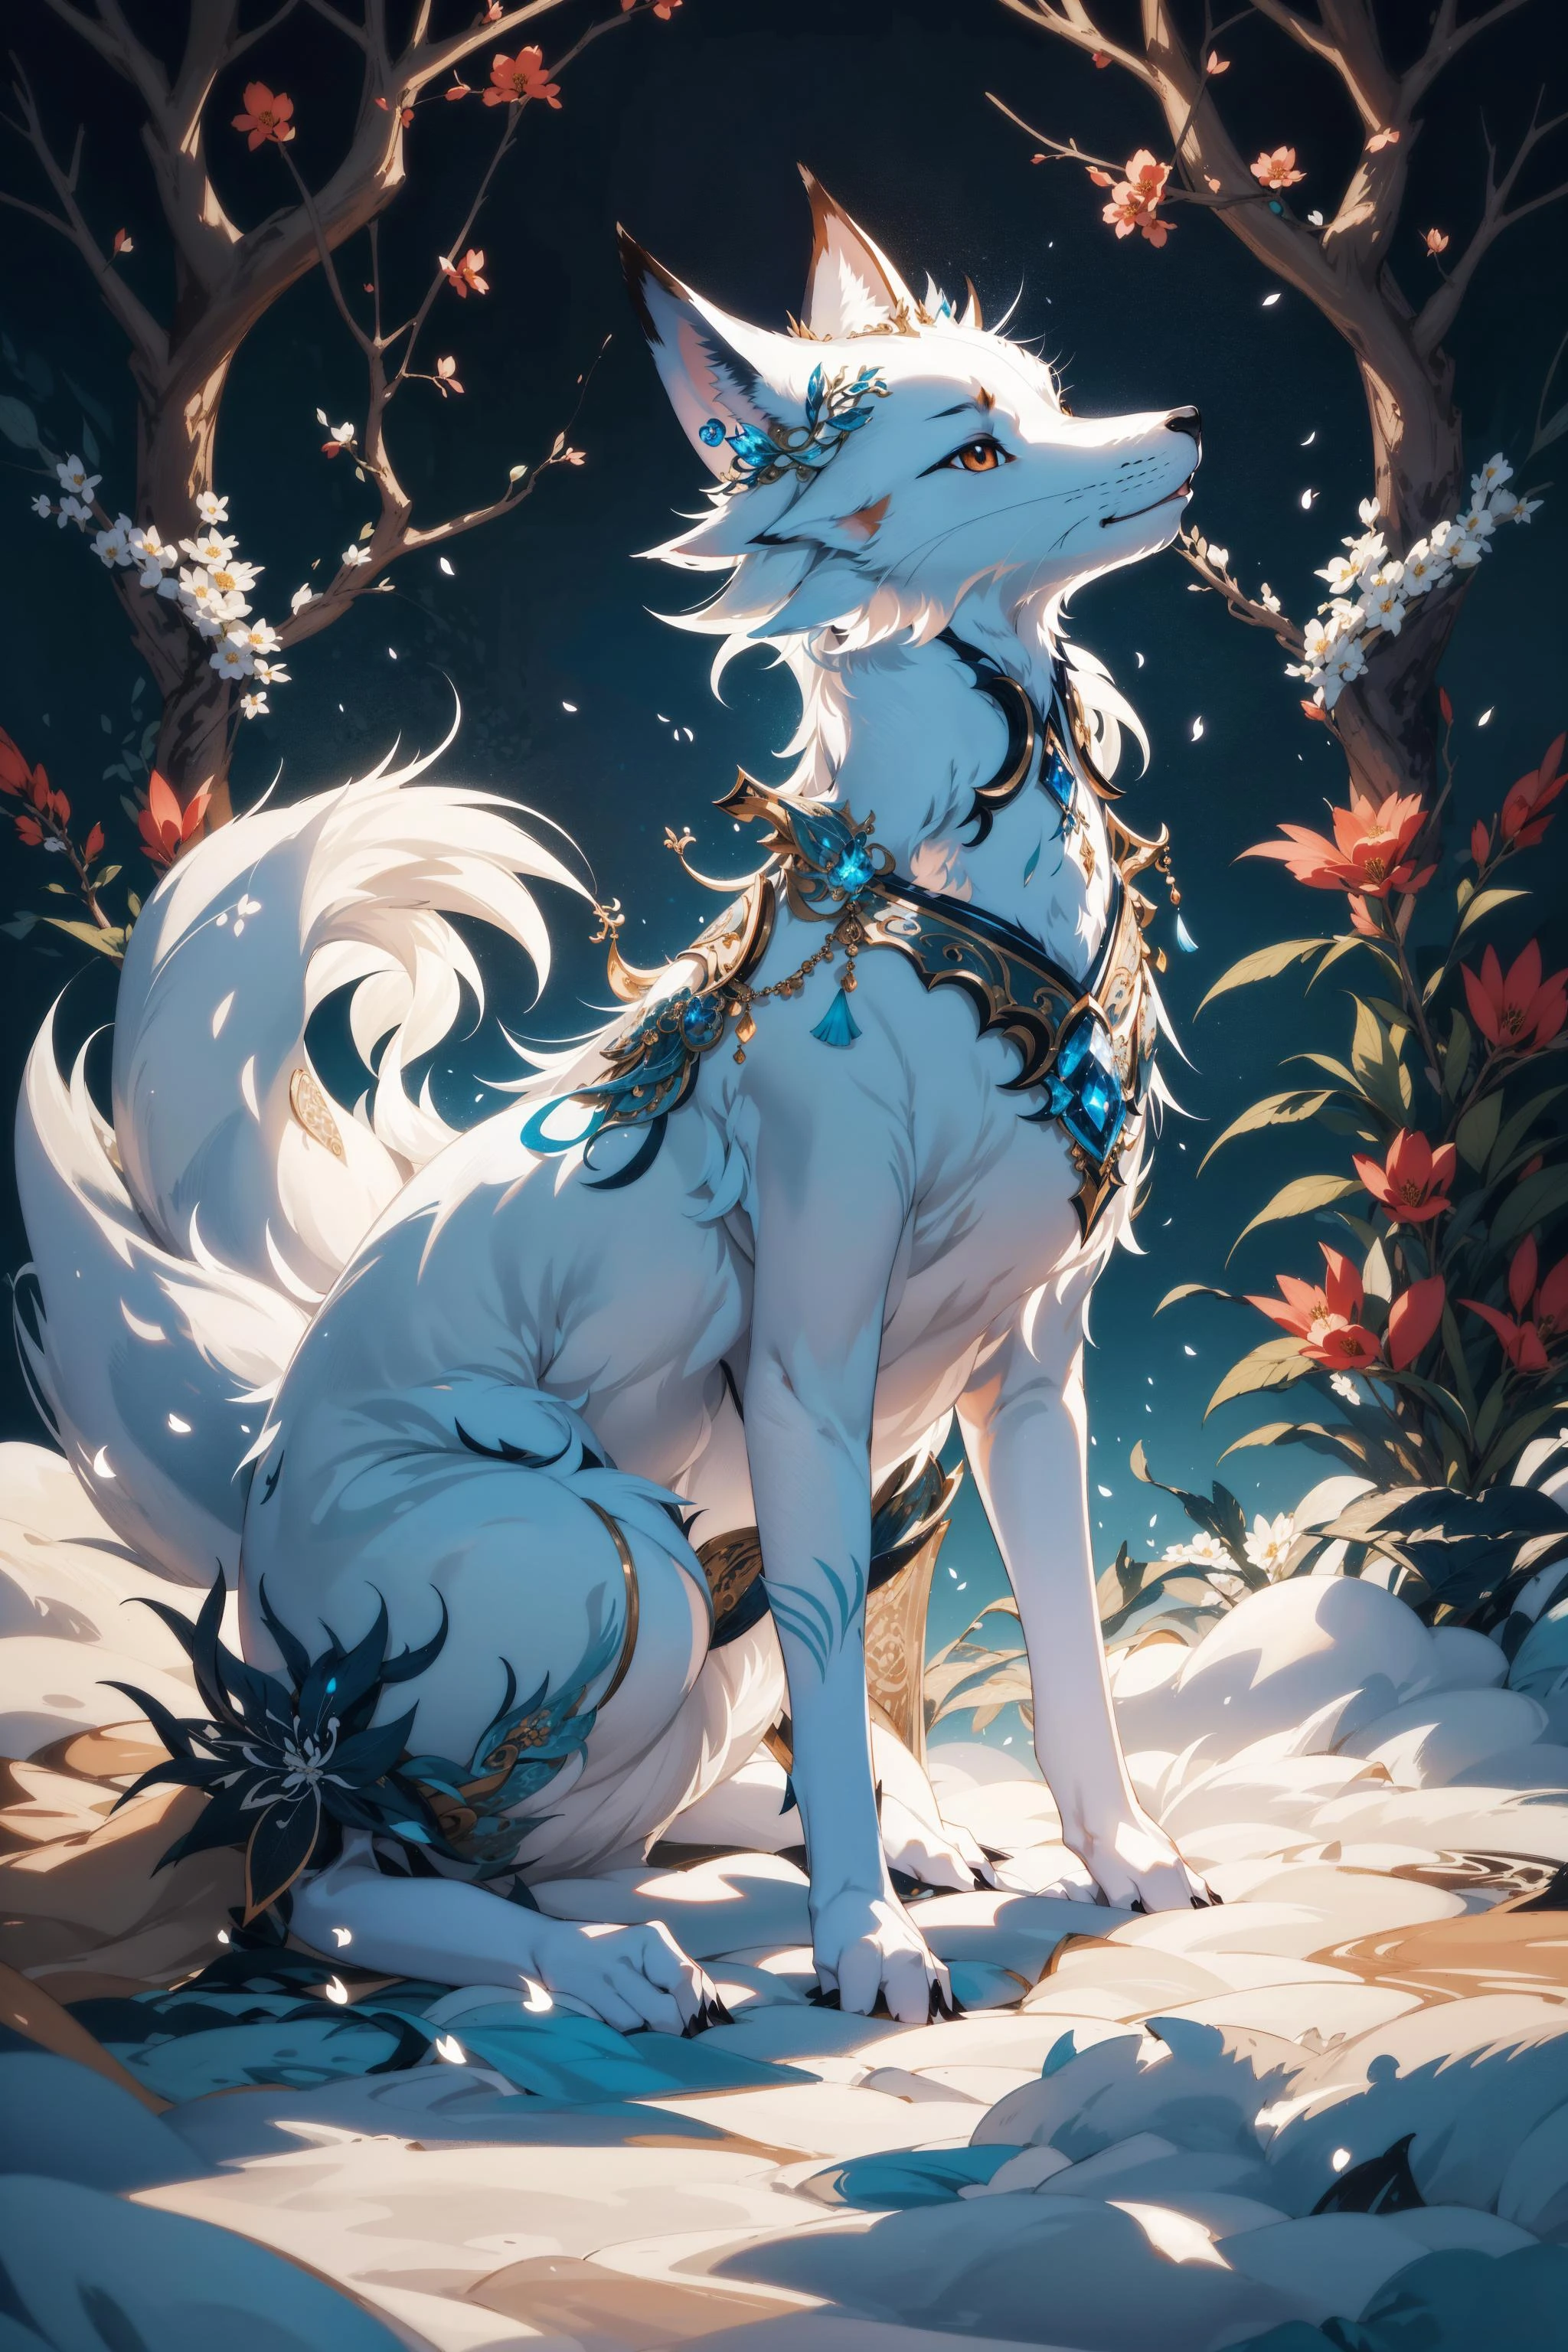 breathtaking, masterpiece, nine-tailed white fox, japanese art style, , majestic, bokeh, ink, art, no_human, complex background, beautiful tails,
n a serene and enchanted forest, a mesmerizing sight awaits those fortunate enough to catch a glimpse - a breathtaking white fox with a lustrous coat that gleams like freshly fallen snow under the gentle moonlight. Gracefully moving through the undergrowth, its elegant form captures the essence of ethereal beauty. But what truly sets this wondrous creature apart is its extraordinary nine tails, each one adorned with intricate patterns that seem to tell ancient tales of mythical wonders. With every swish of those magnificent tails, an enchanting aura of magic surrounds the fox, captivating all who behold its splendor. As the embodiment of purity and allure, the white fox with its resplendent nine tails is a living testament to the wonders of nature's creativity and brilliance., 